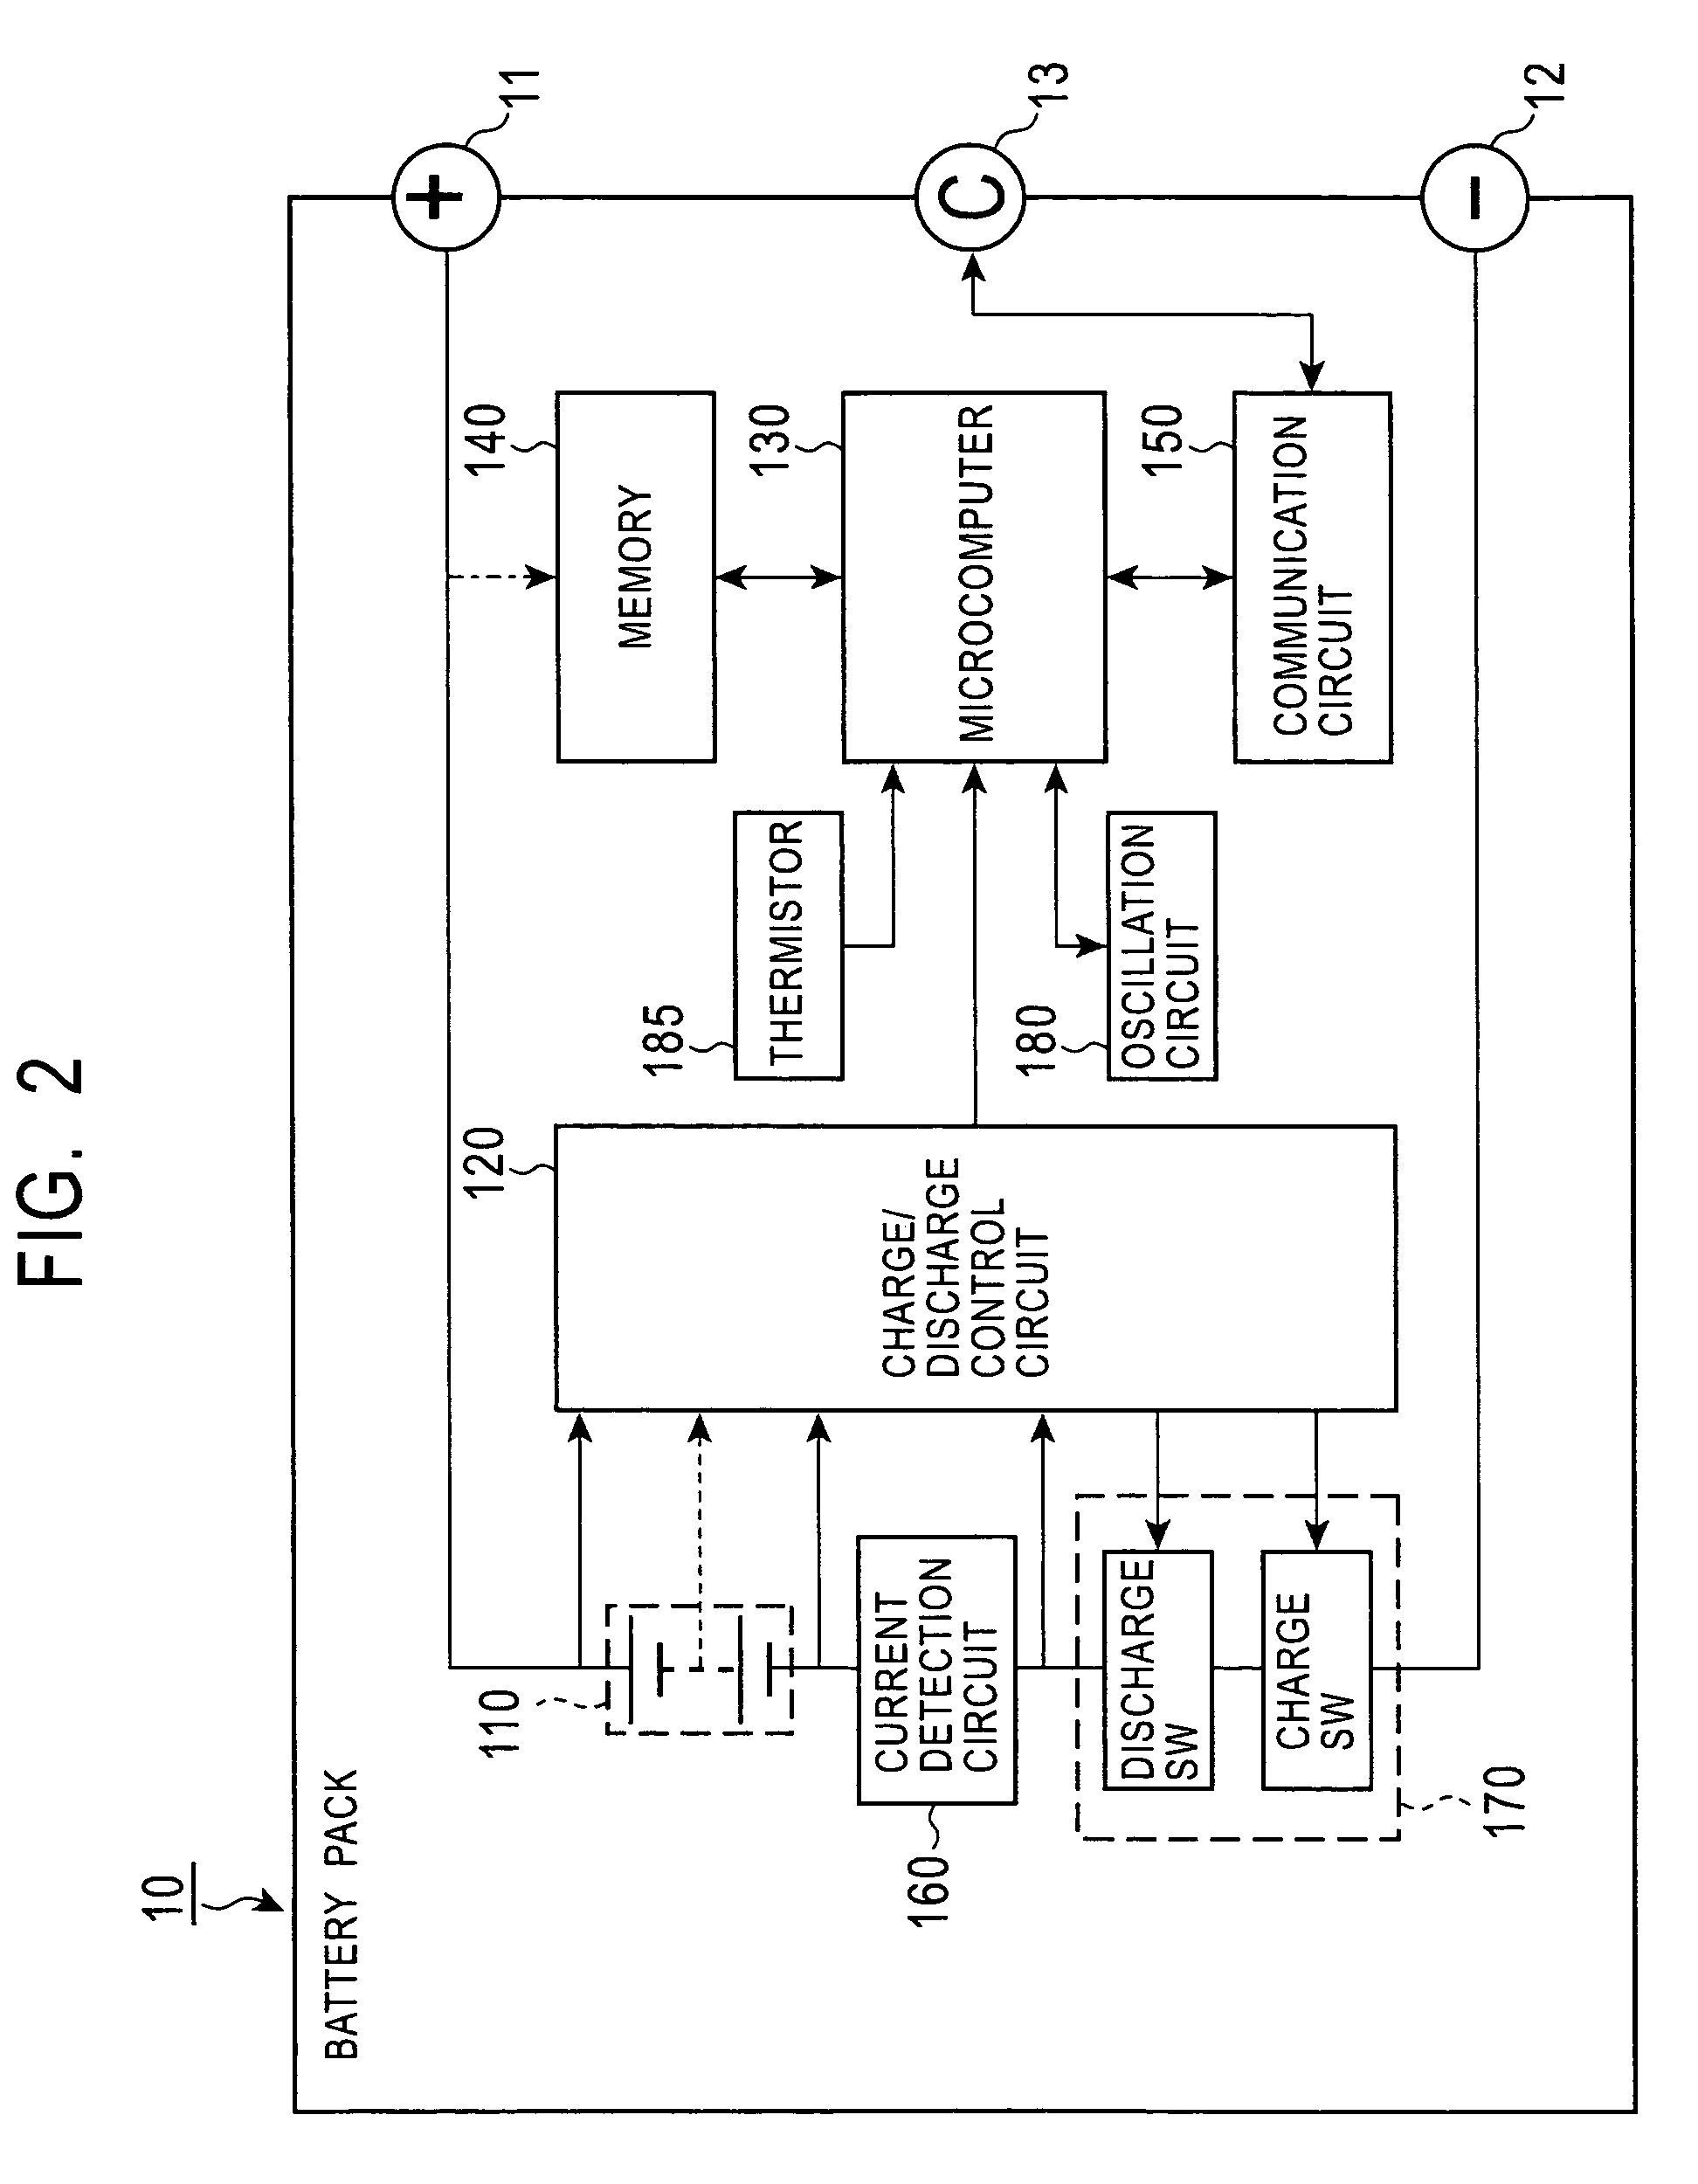 Battery pack having an electronic storage device